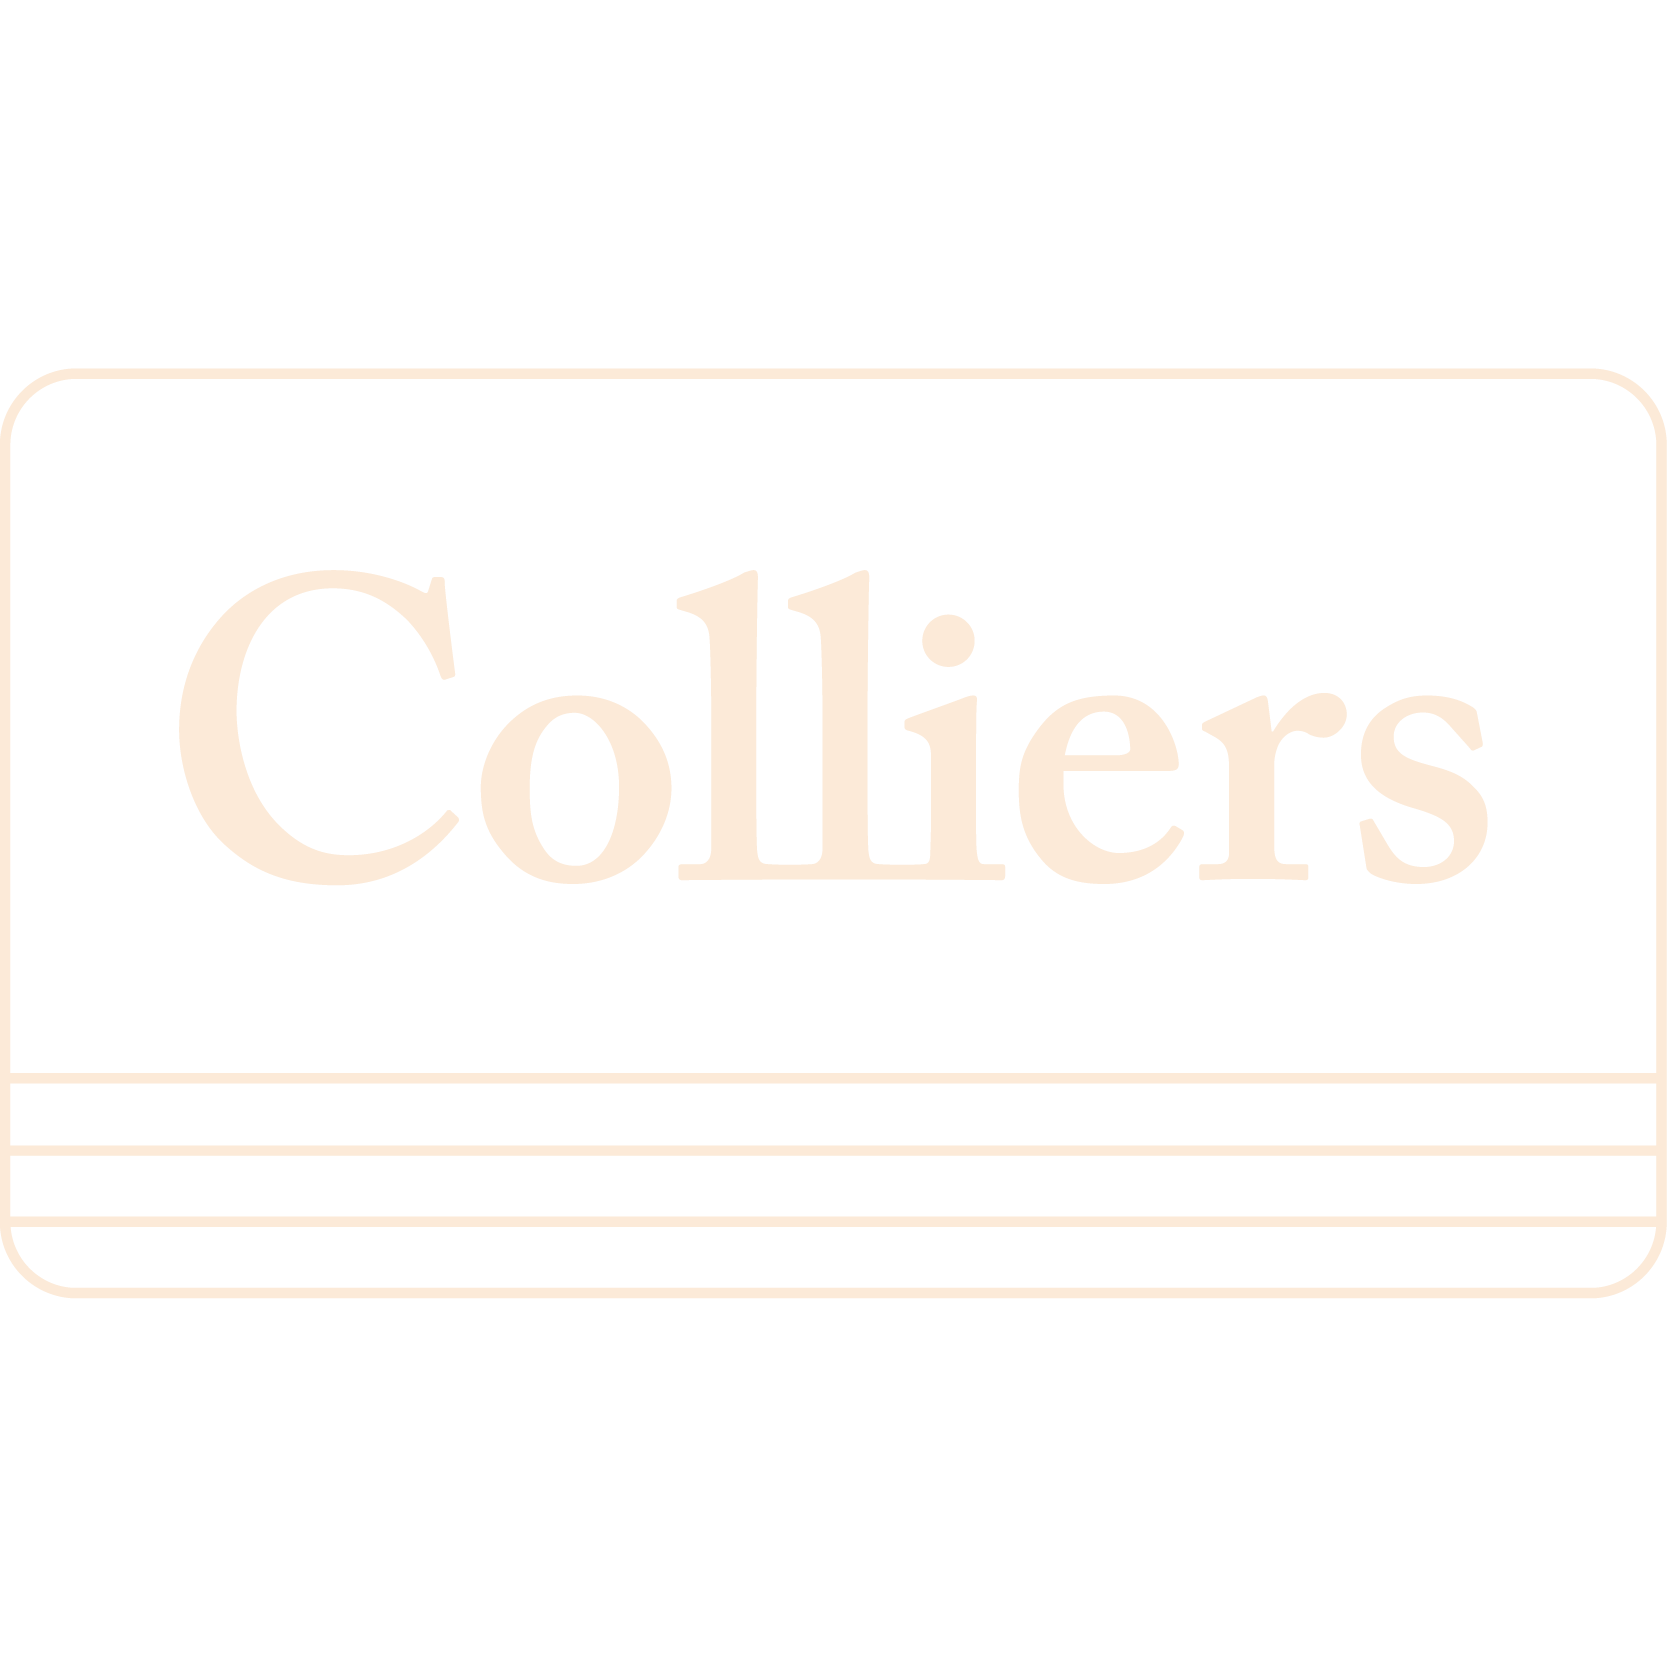 Colliers_Peach.png